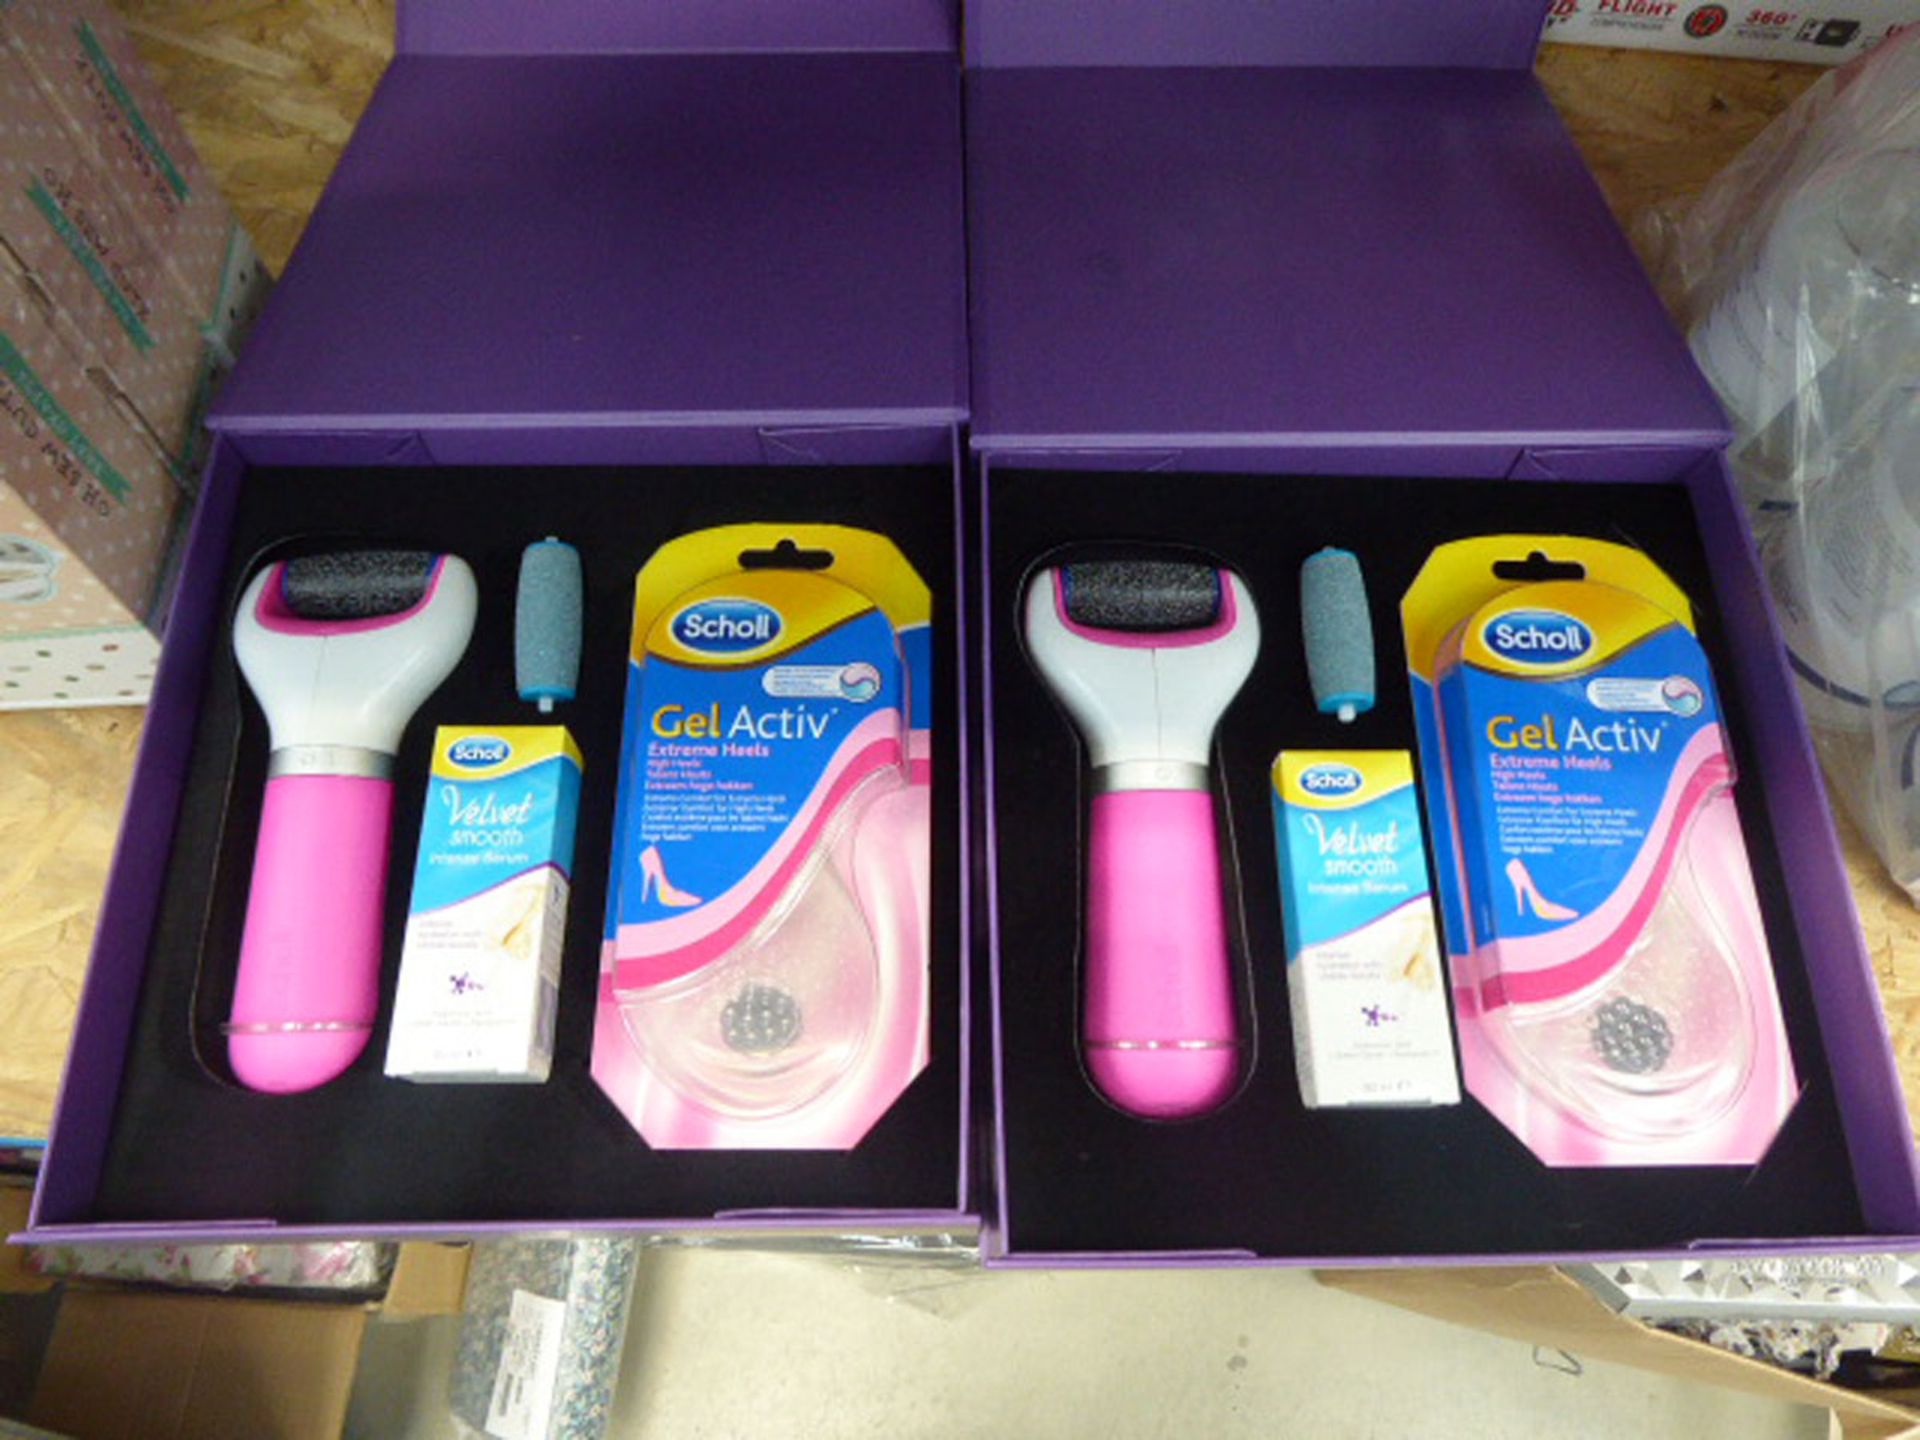 3262/3 - 2 Scholl velvet smooth limited edition skincare sets - Image 2 of 2